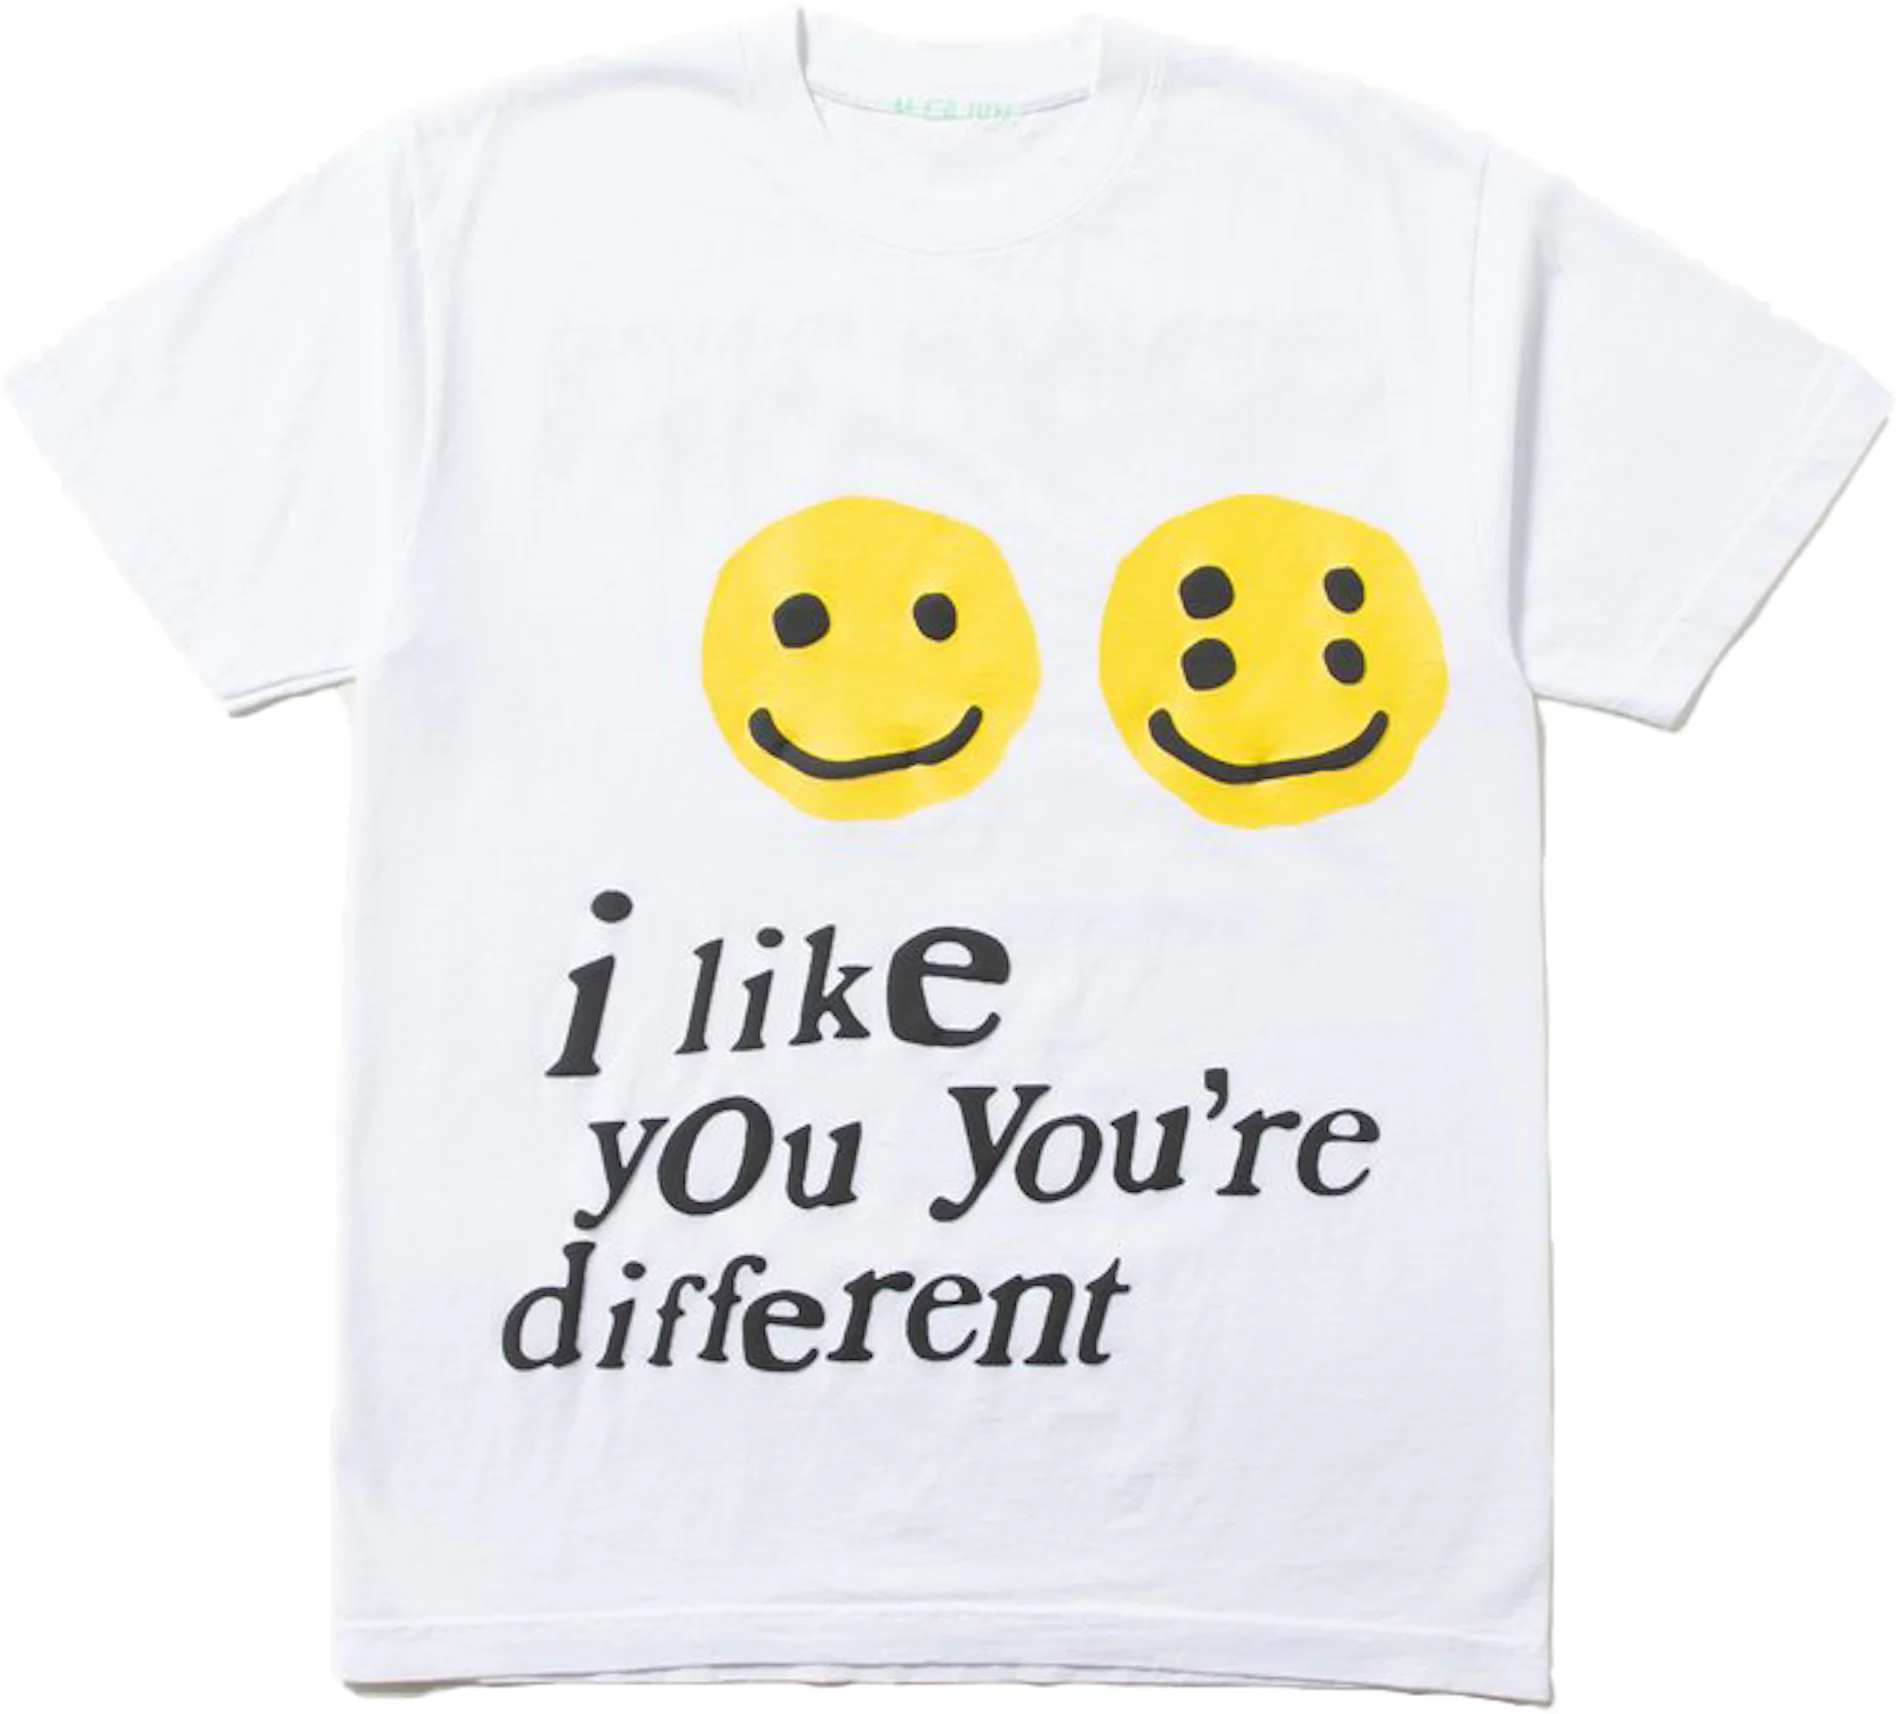 Cactus Plant Flea Market I Like You You're Different Tee White